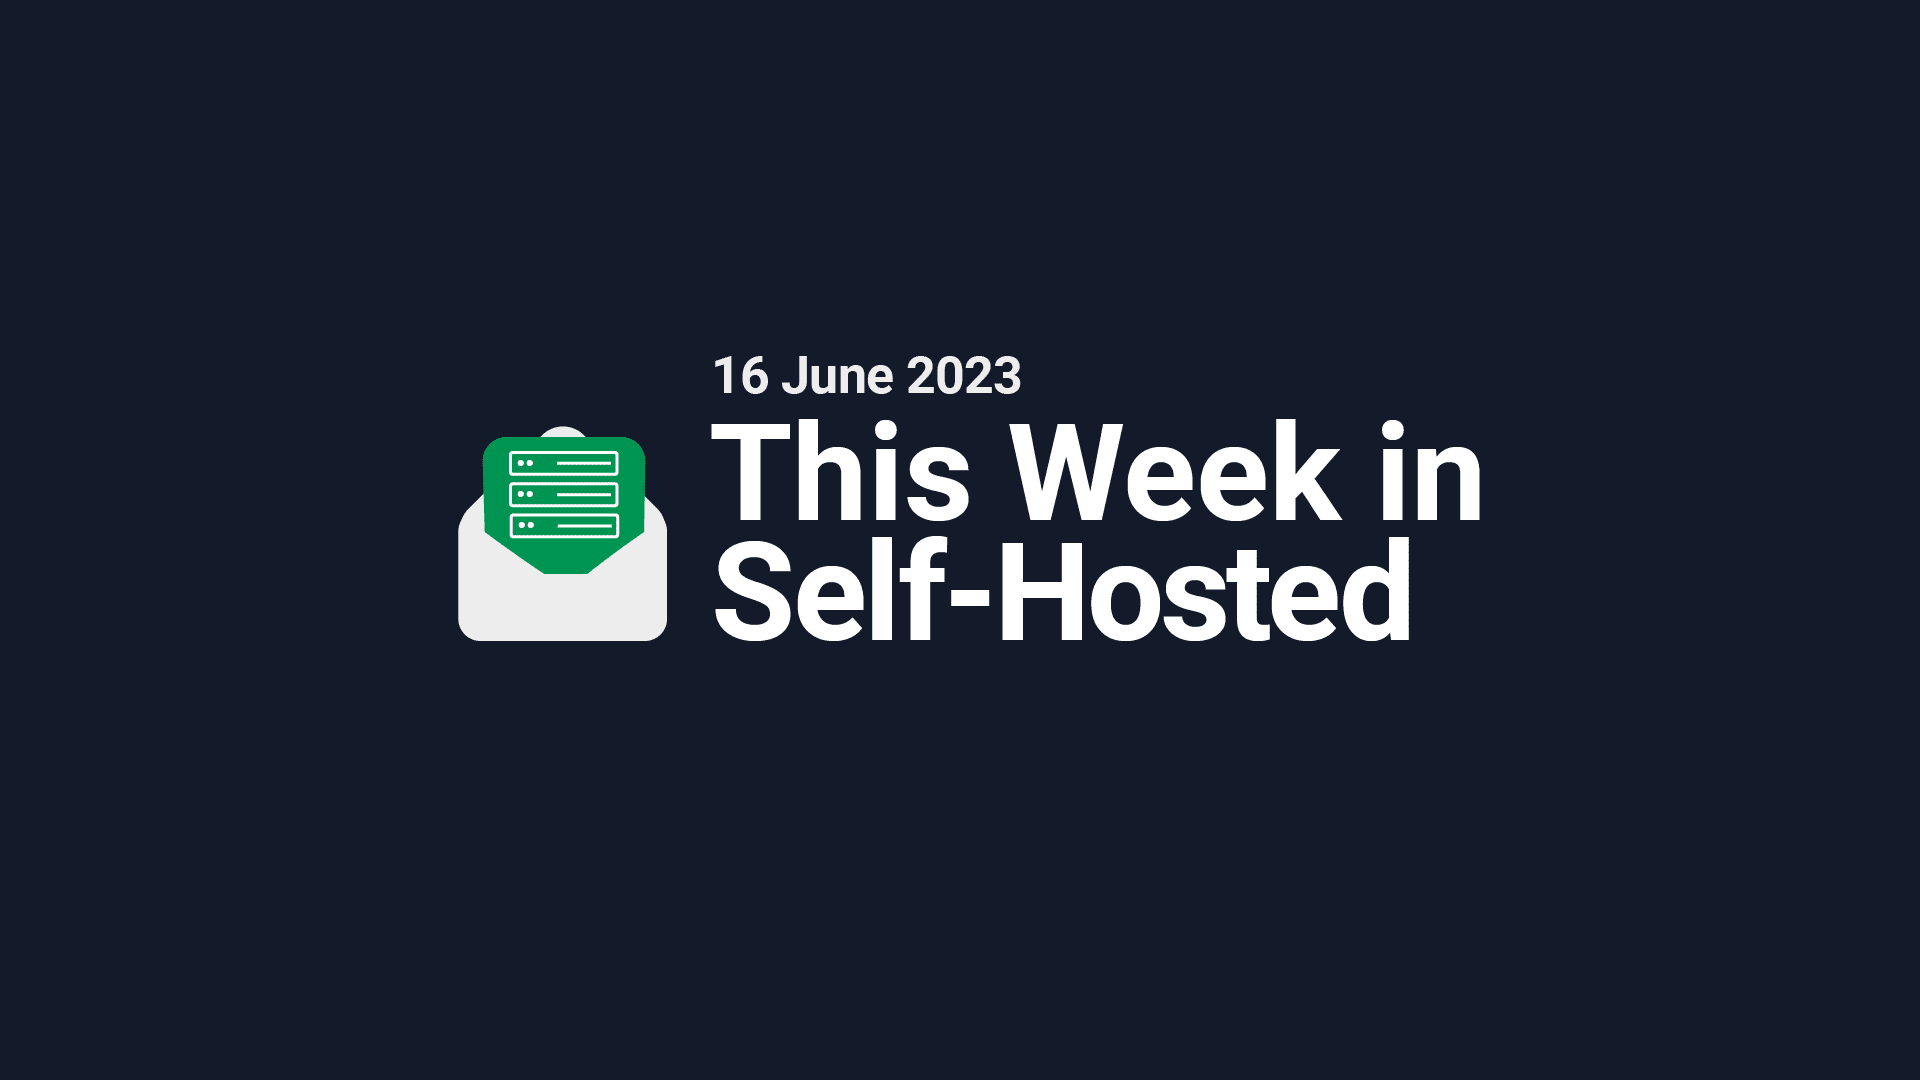 This Week in Self-Hosted (16 June 2023) Post image